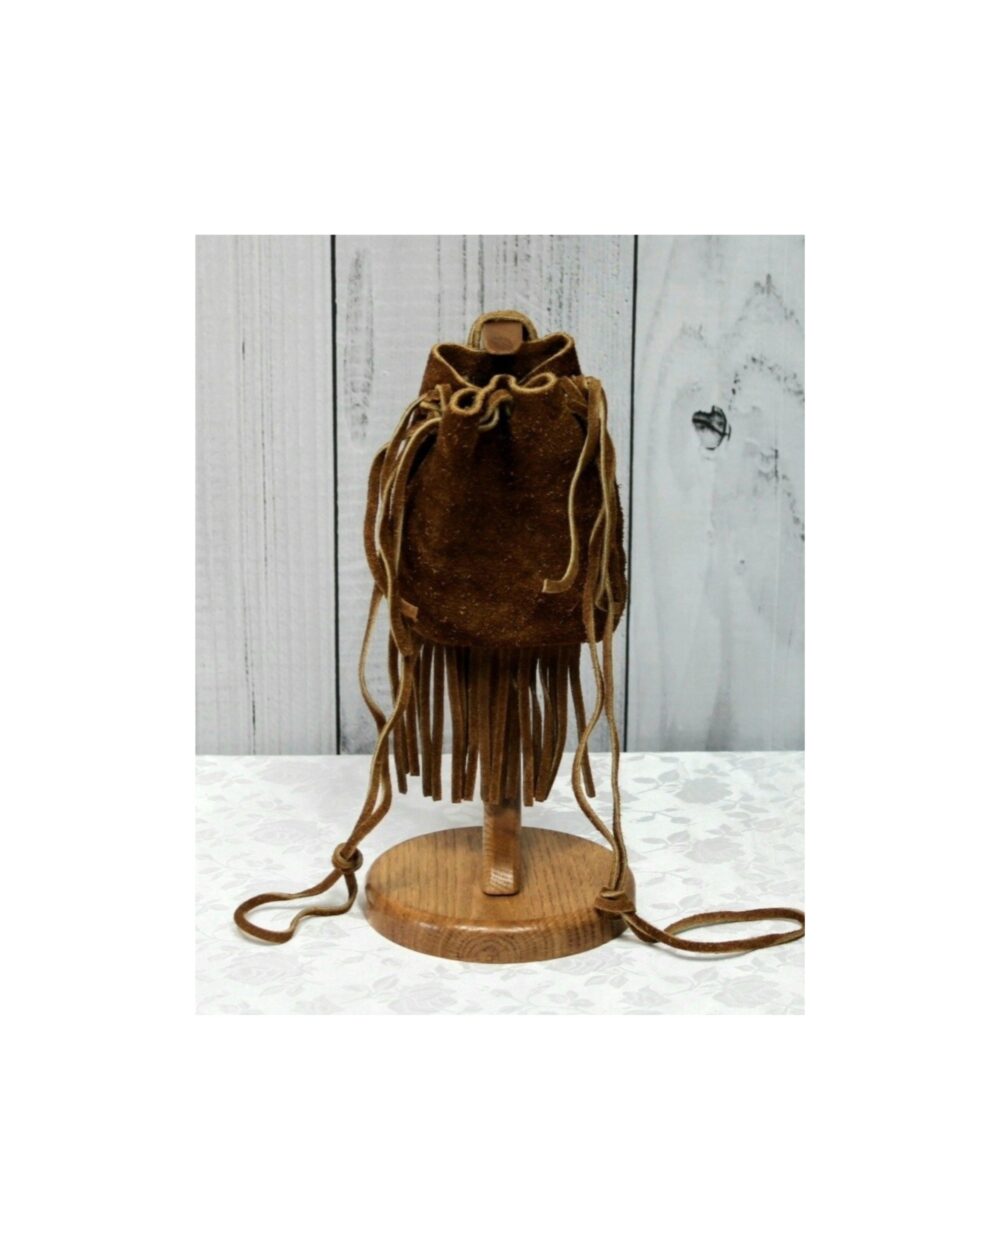 ili NY Leather Drawstring Jewelry Pouch - Charlotte's Web Monogramming &  Gifts